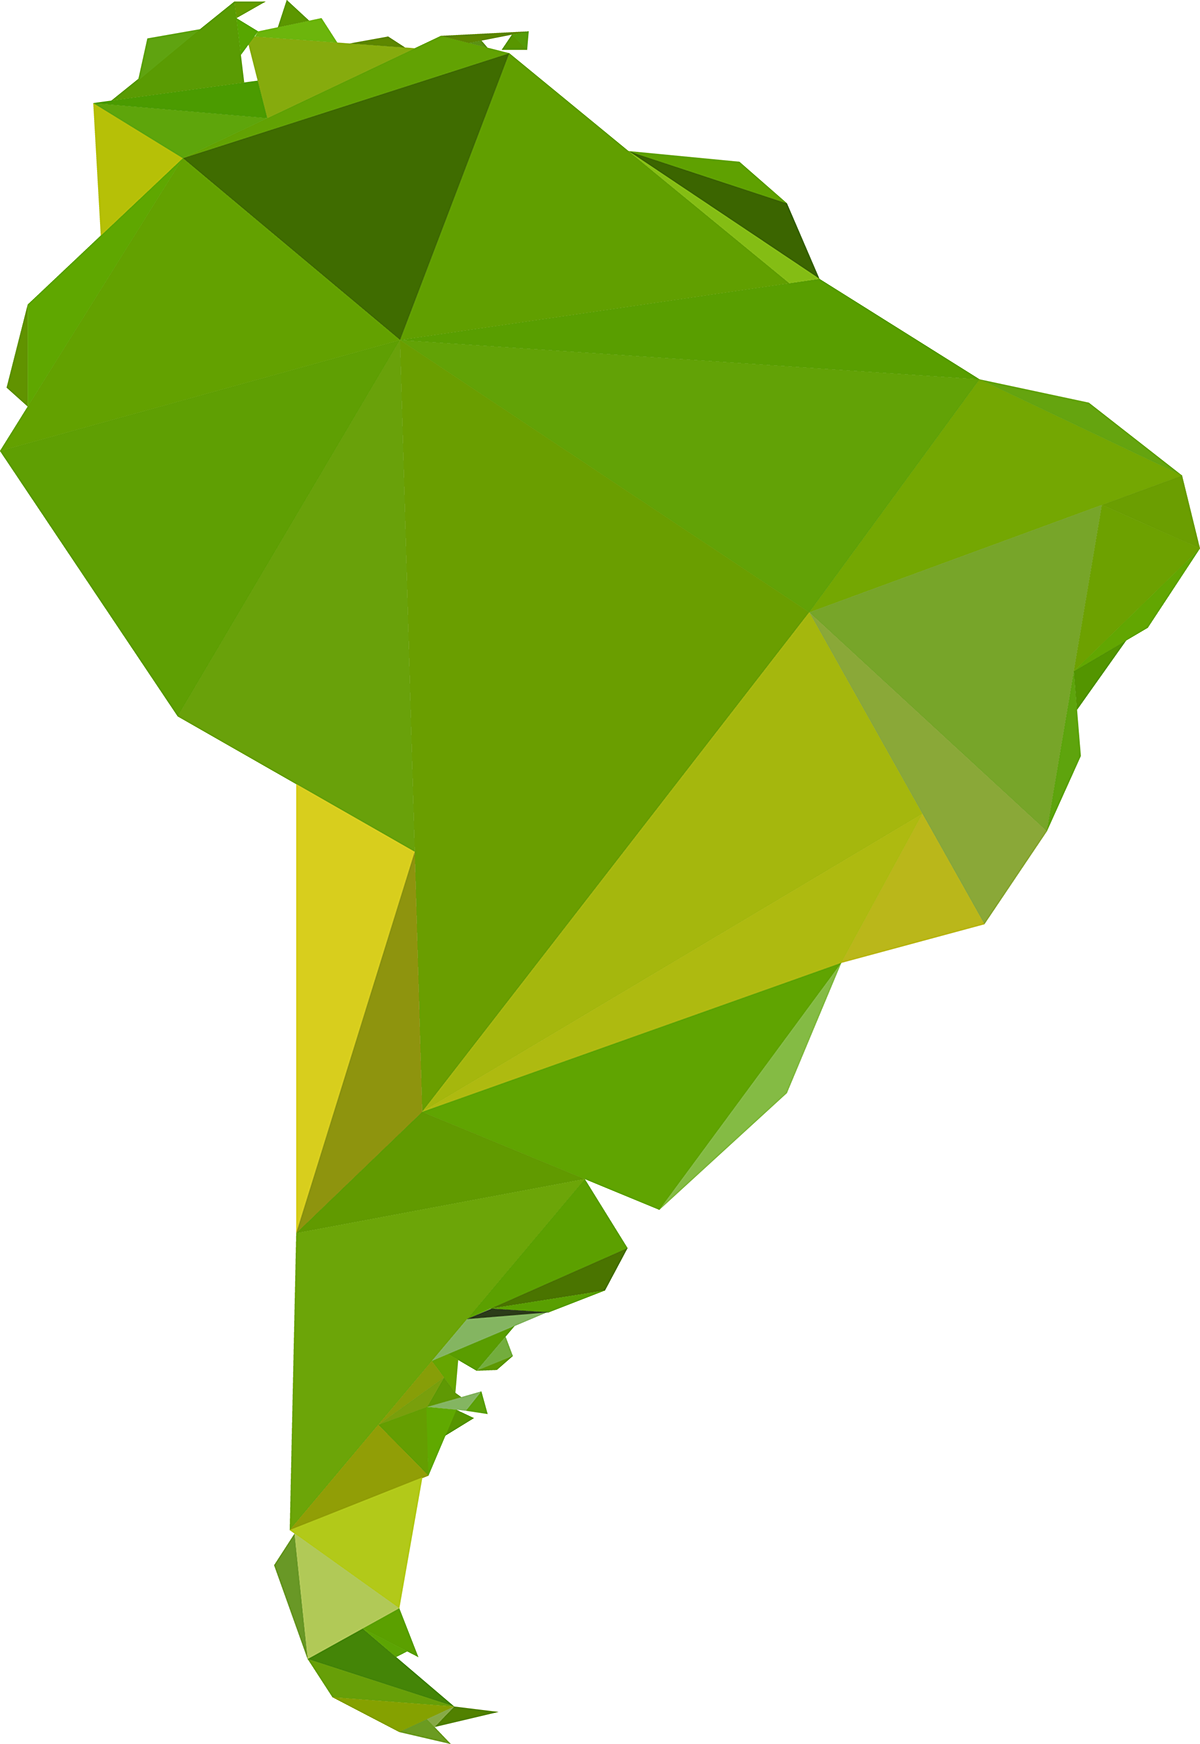 Map Of South America Vector In The Form Of Low Poly - Origami (1200x1744)